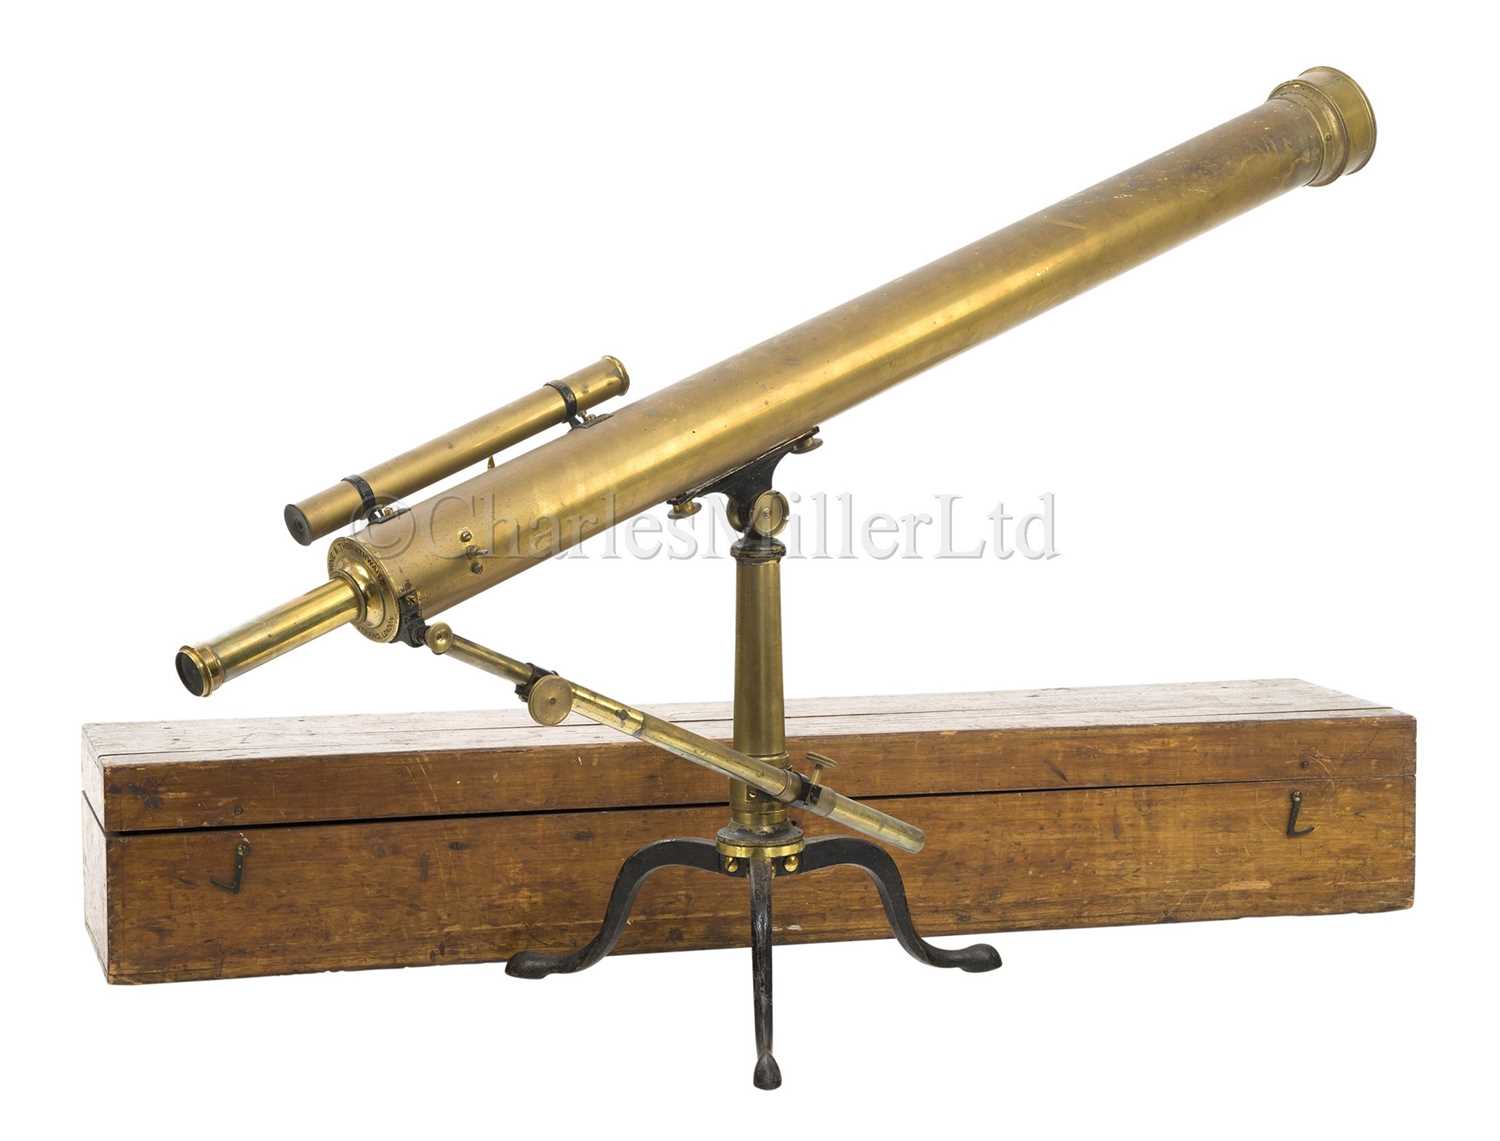 Lot 277 - A 3IN. REFRACTING TELESCOPE BY HORNE & THORNTHWAITE, LONDON, CIRCA 1850